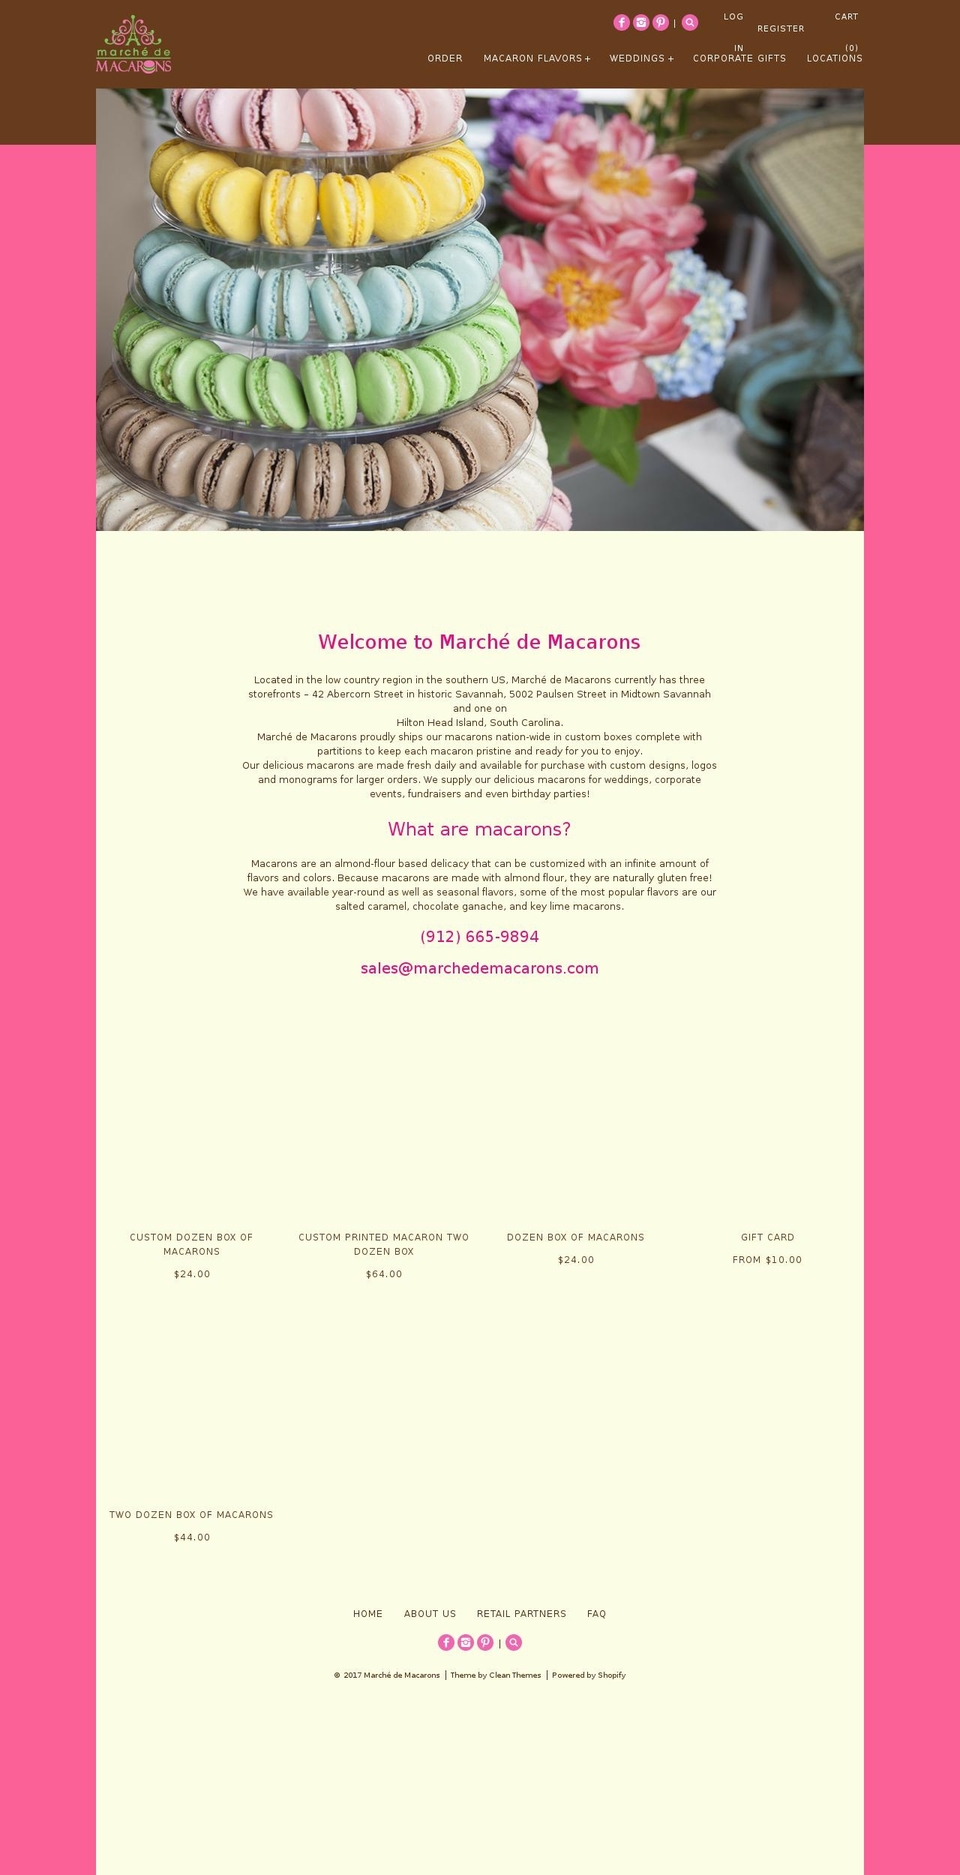 Alchemy Shopify theme site example marchedemacarons.com